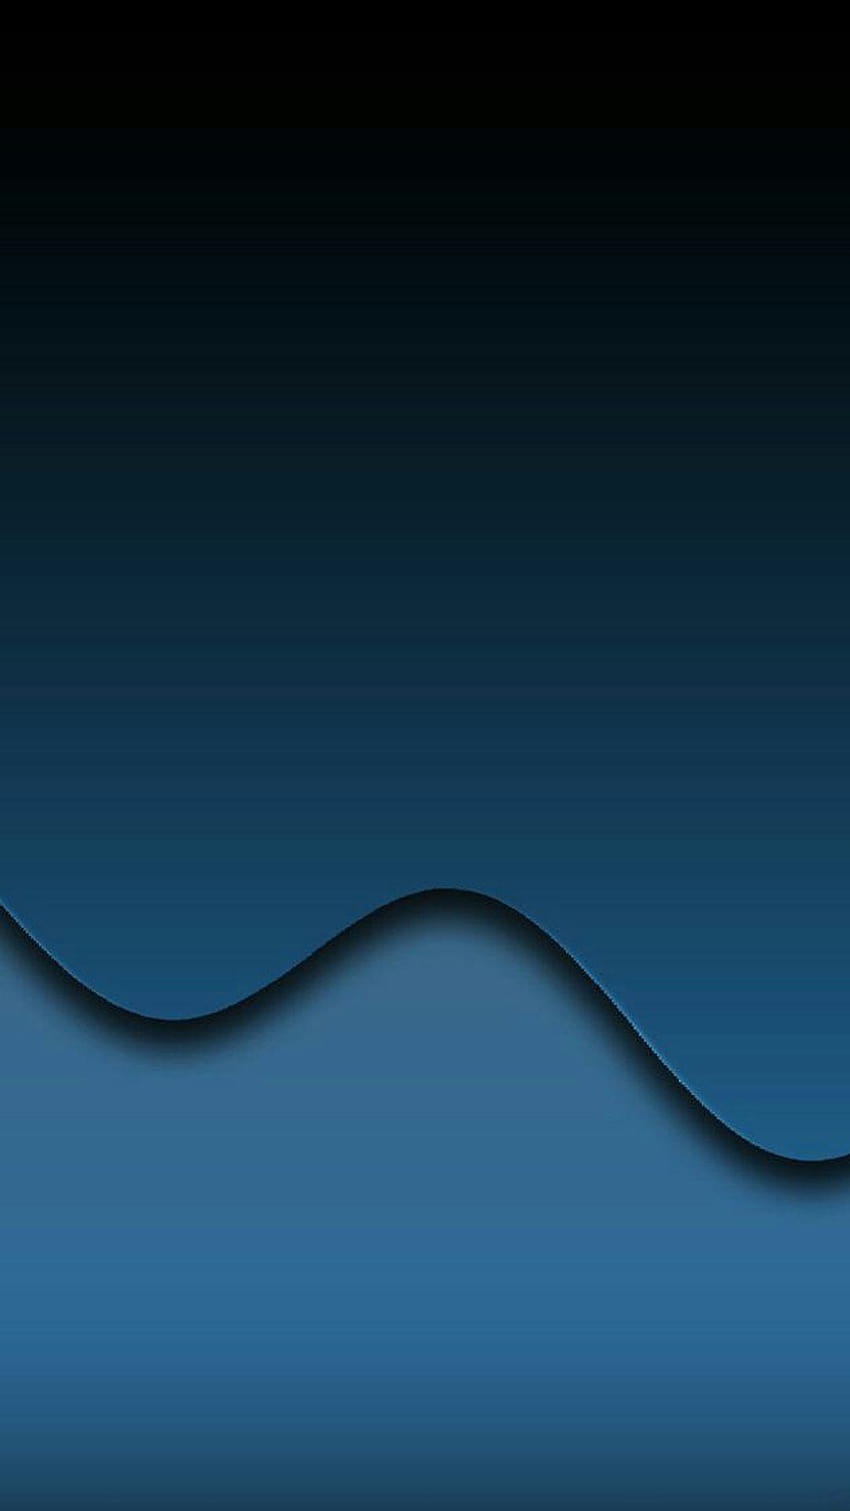 Cool Phone 02 of 10 with Dark Blue Backgrounds and, samsung galaxy j7 prime HD phone wallpaper